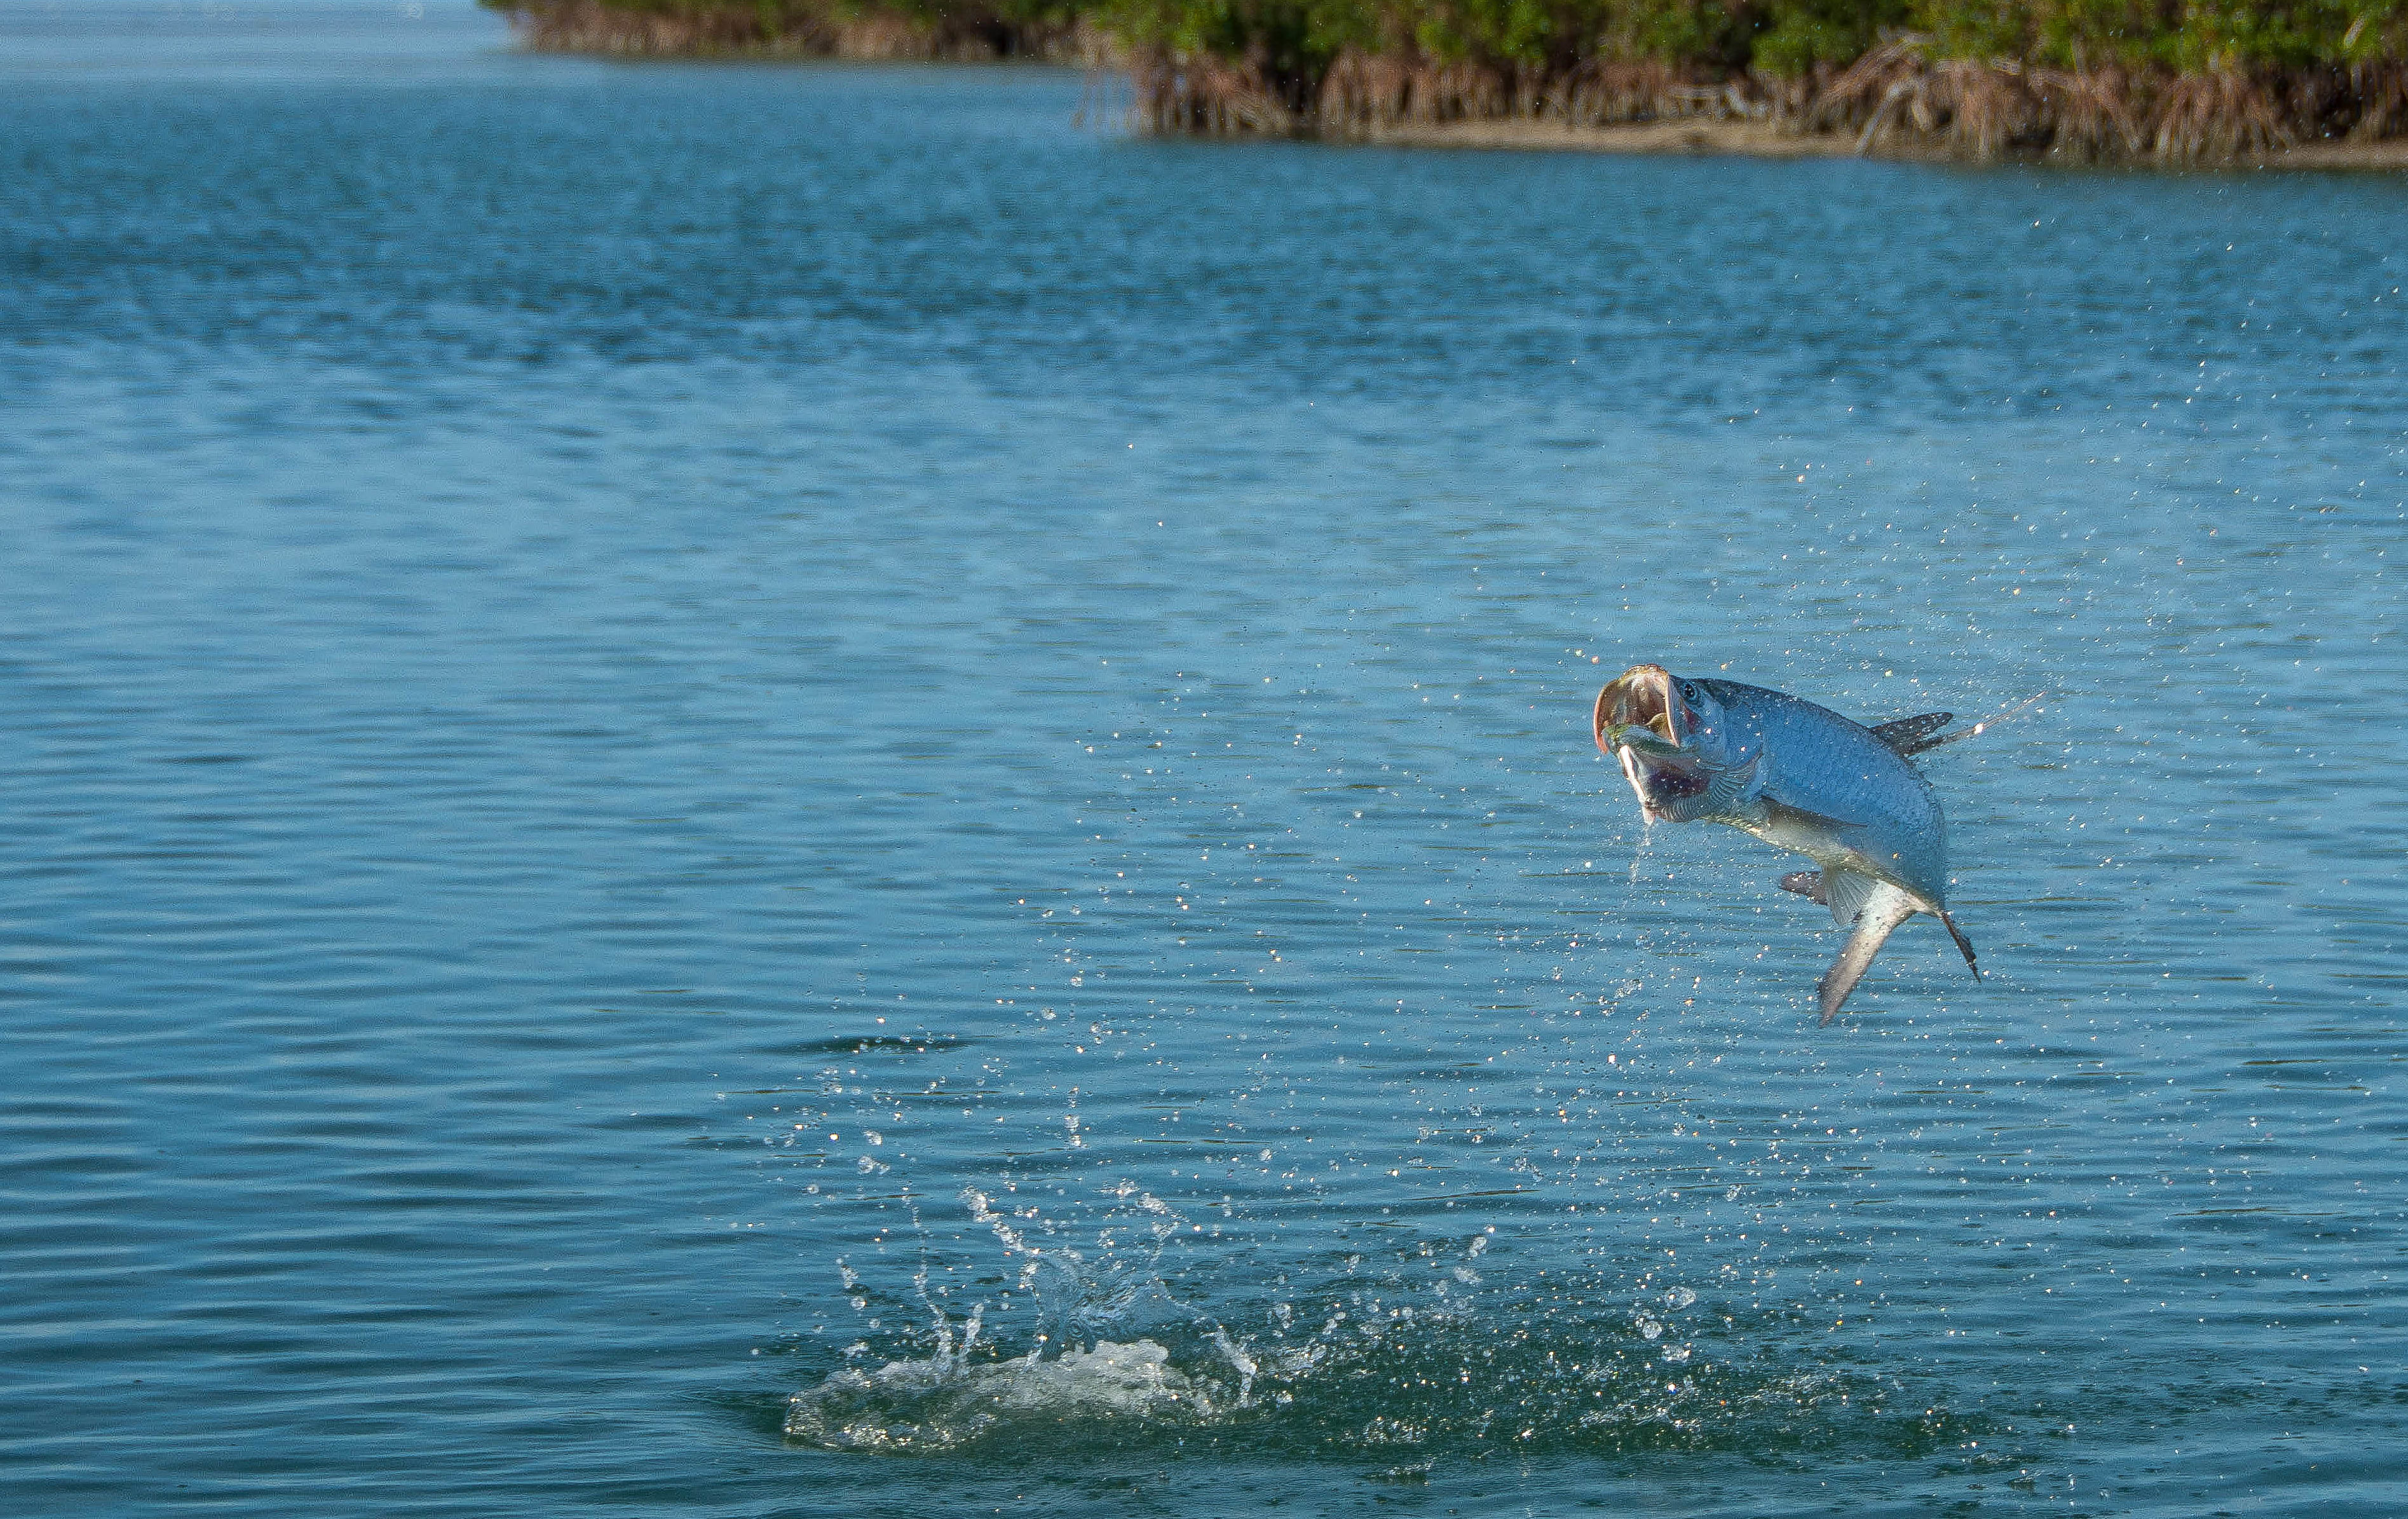 a great picture of a tarpon jumping in the Florida keys with its mouth wide open and a scenic background of a mangrove shoreline.